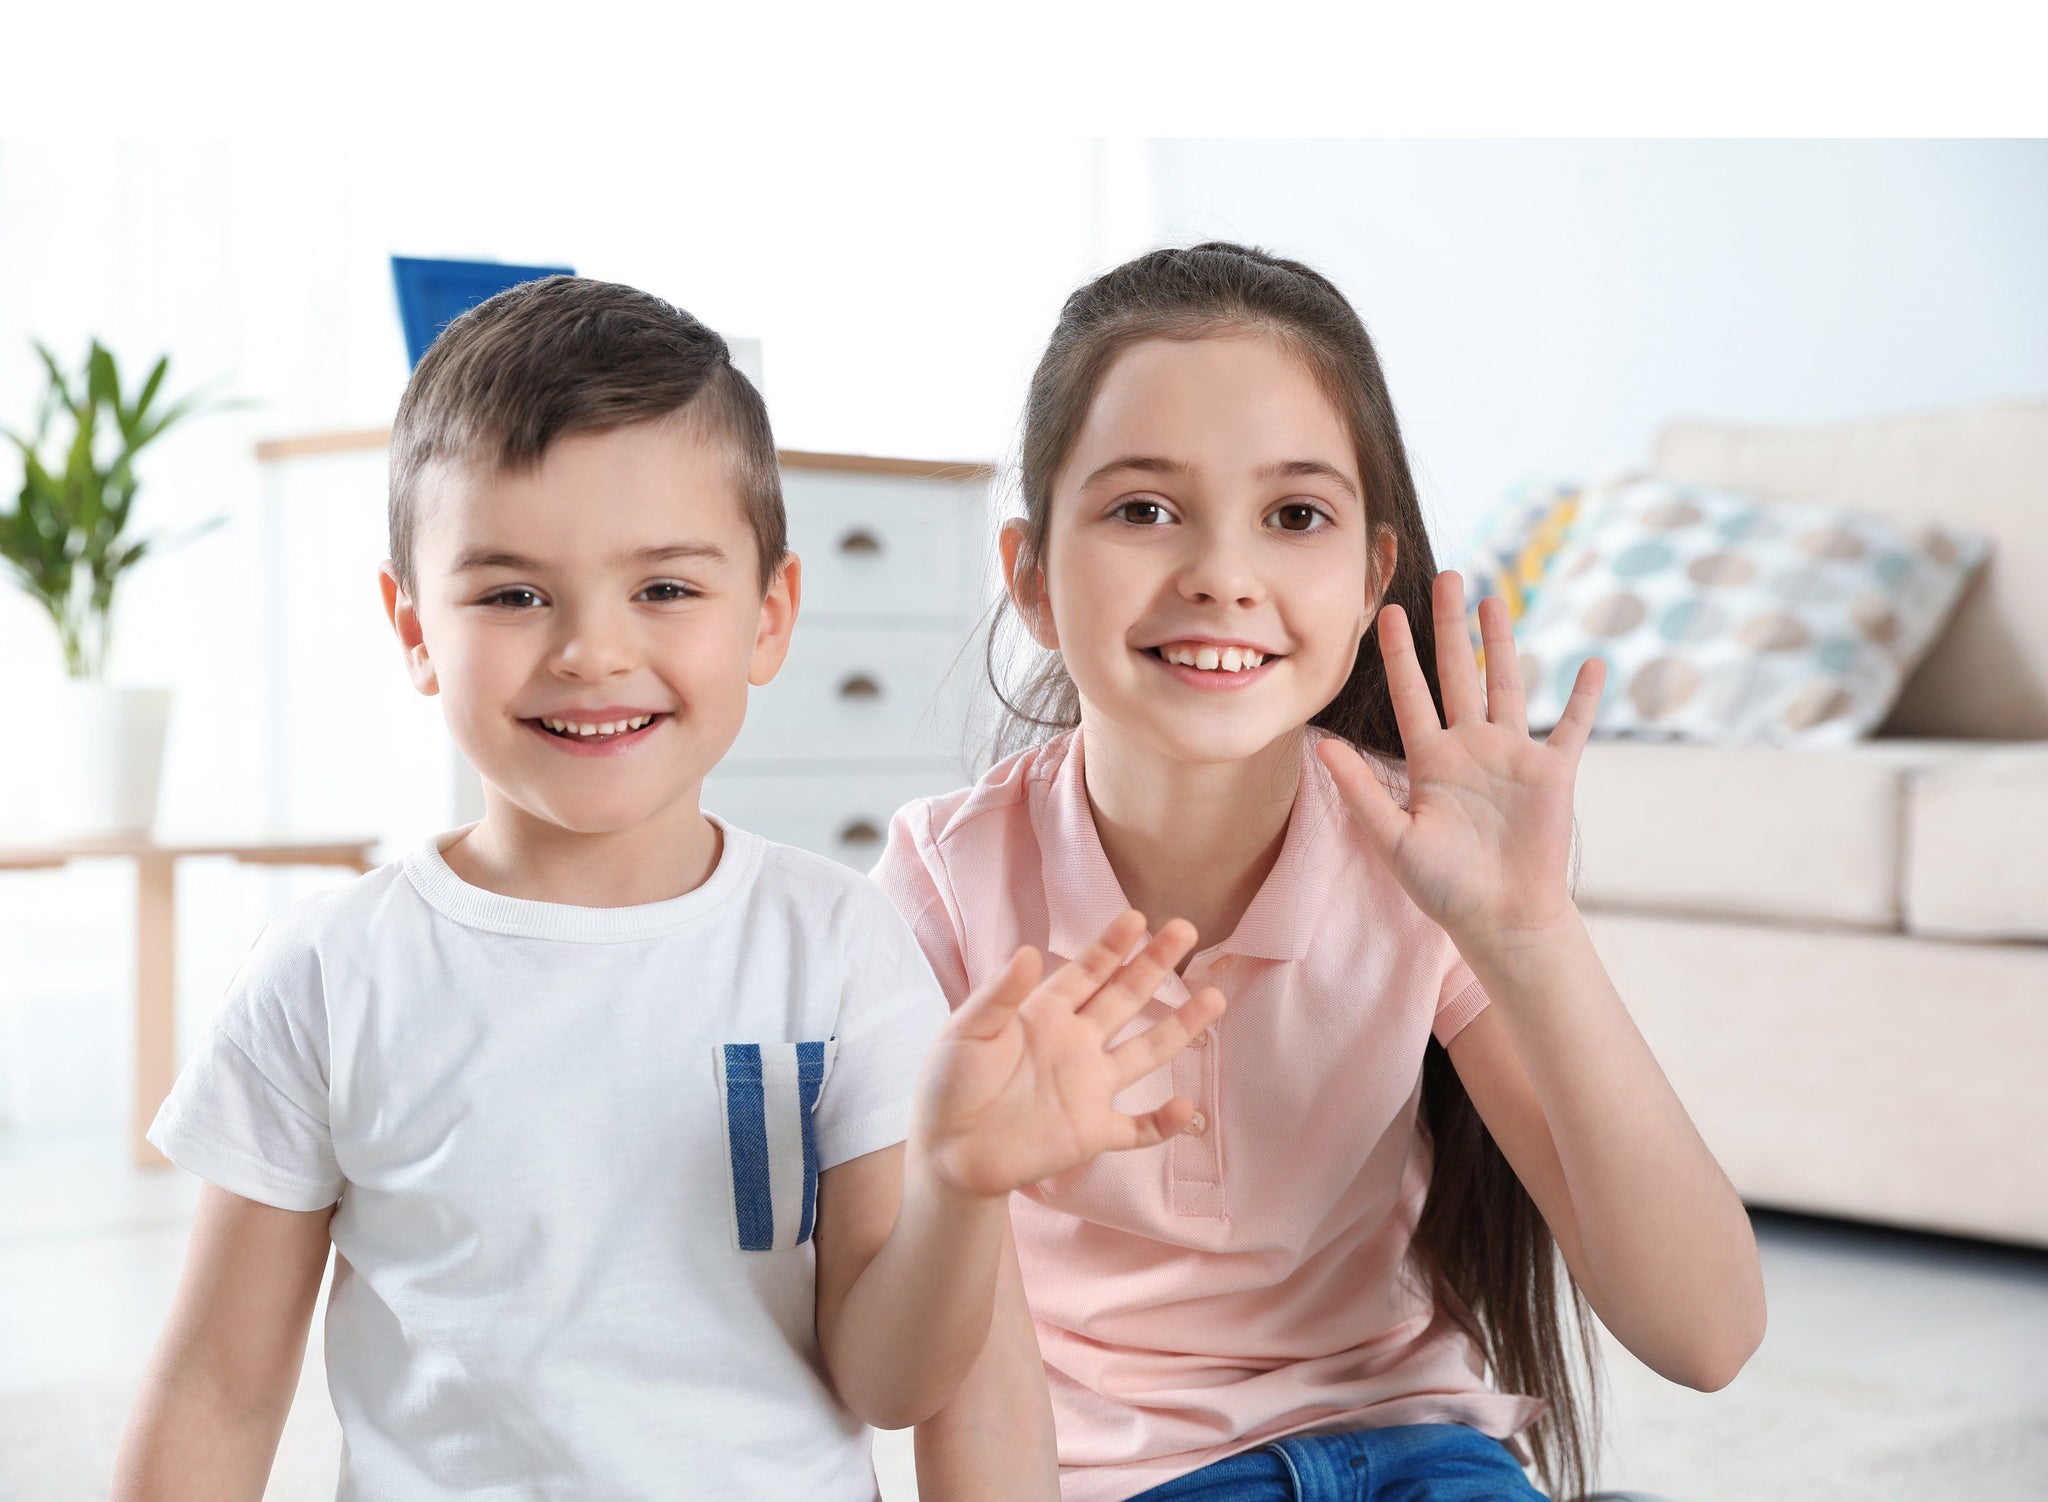 5 Fun Activities to do with Kids on a TV Video Call